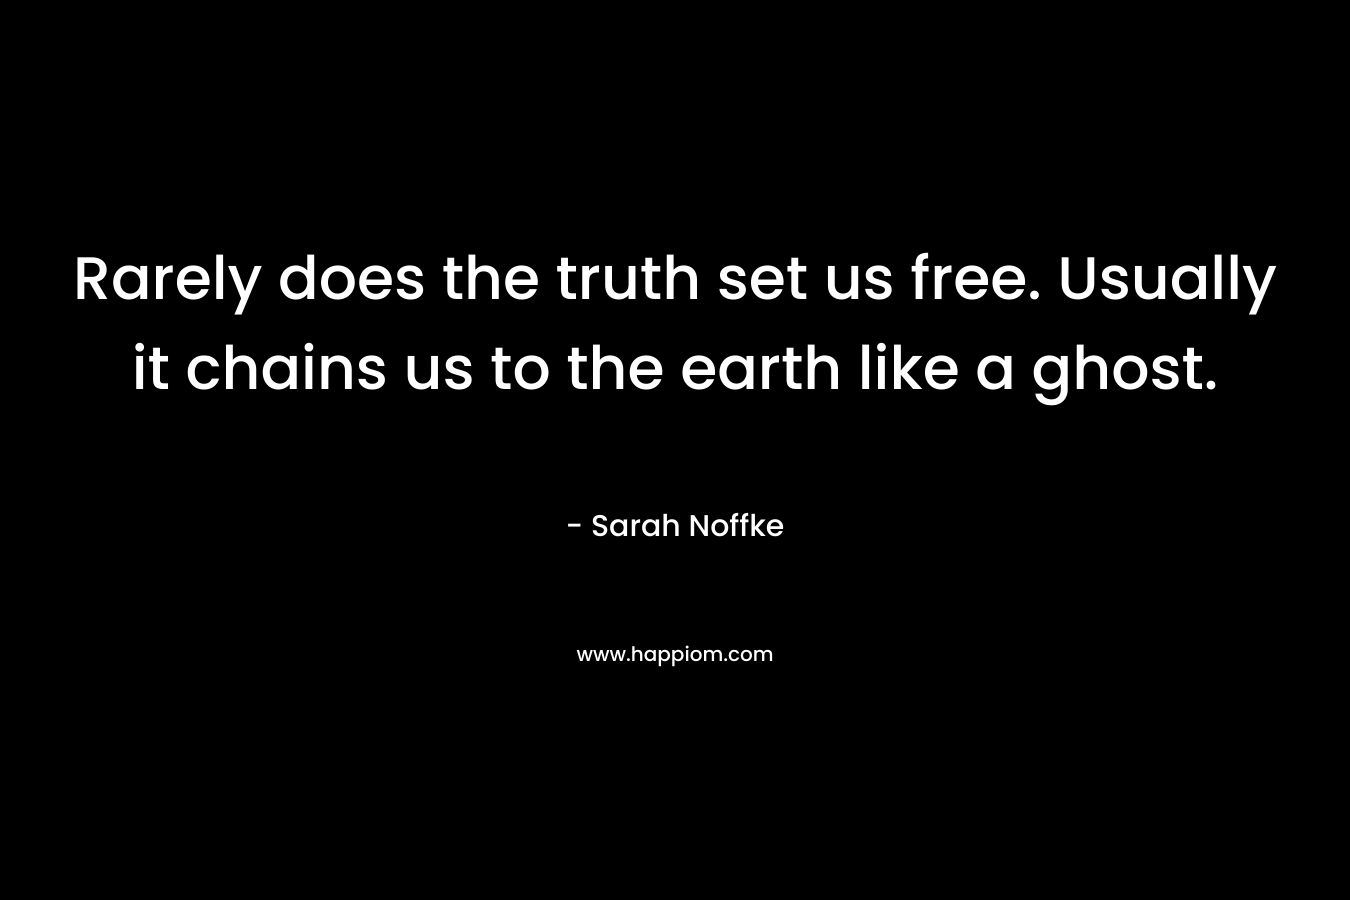 Rarely does the truth set us free. Usually it chains us to the earth like a ghost.